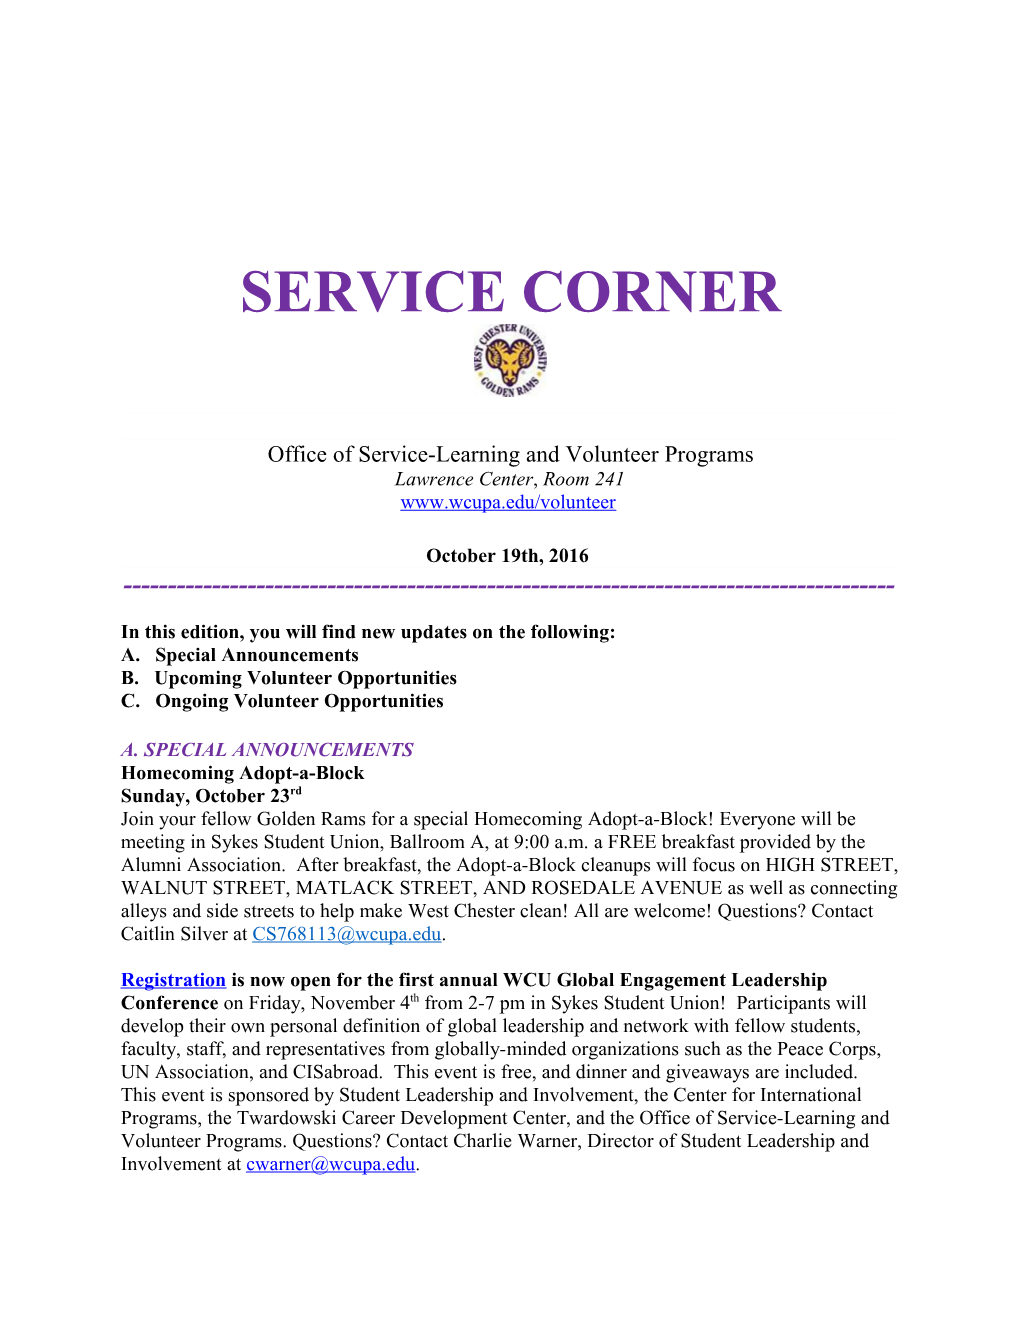 Office of Service-Learning and Volunteer Programs s1